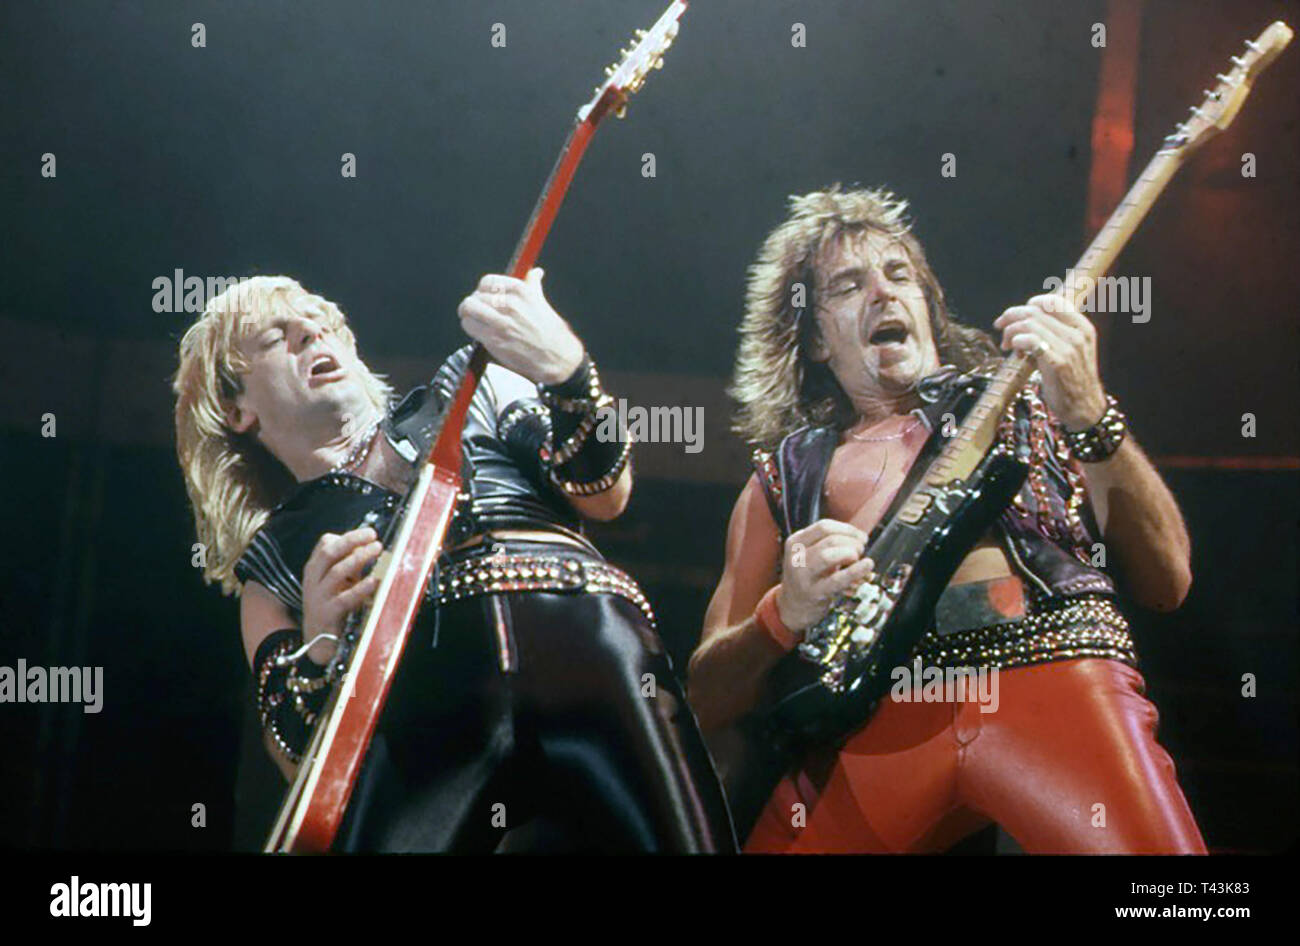 Judas Priest Band High Resolution Stock Photography and Images - Alamy